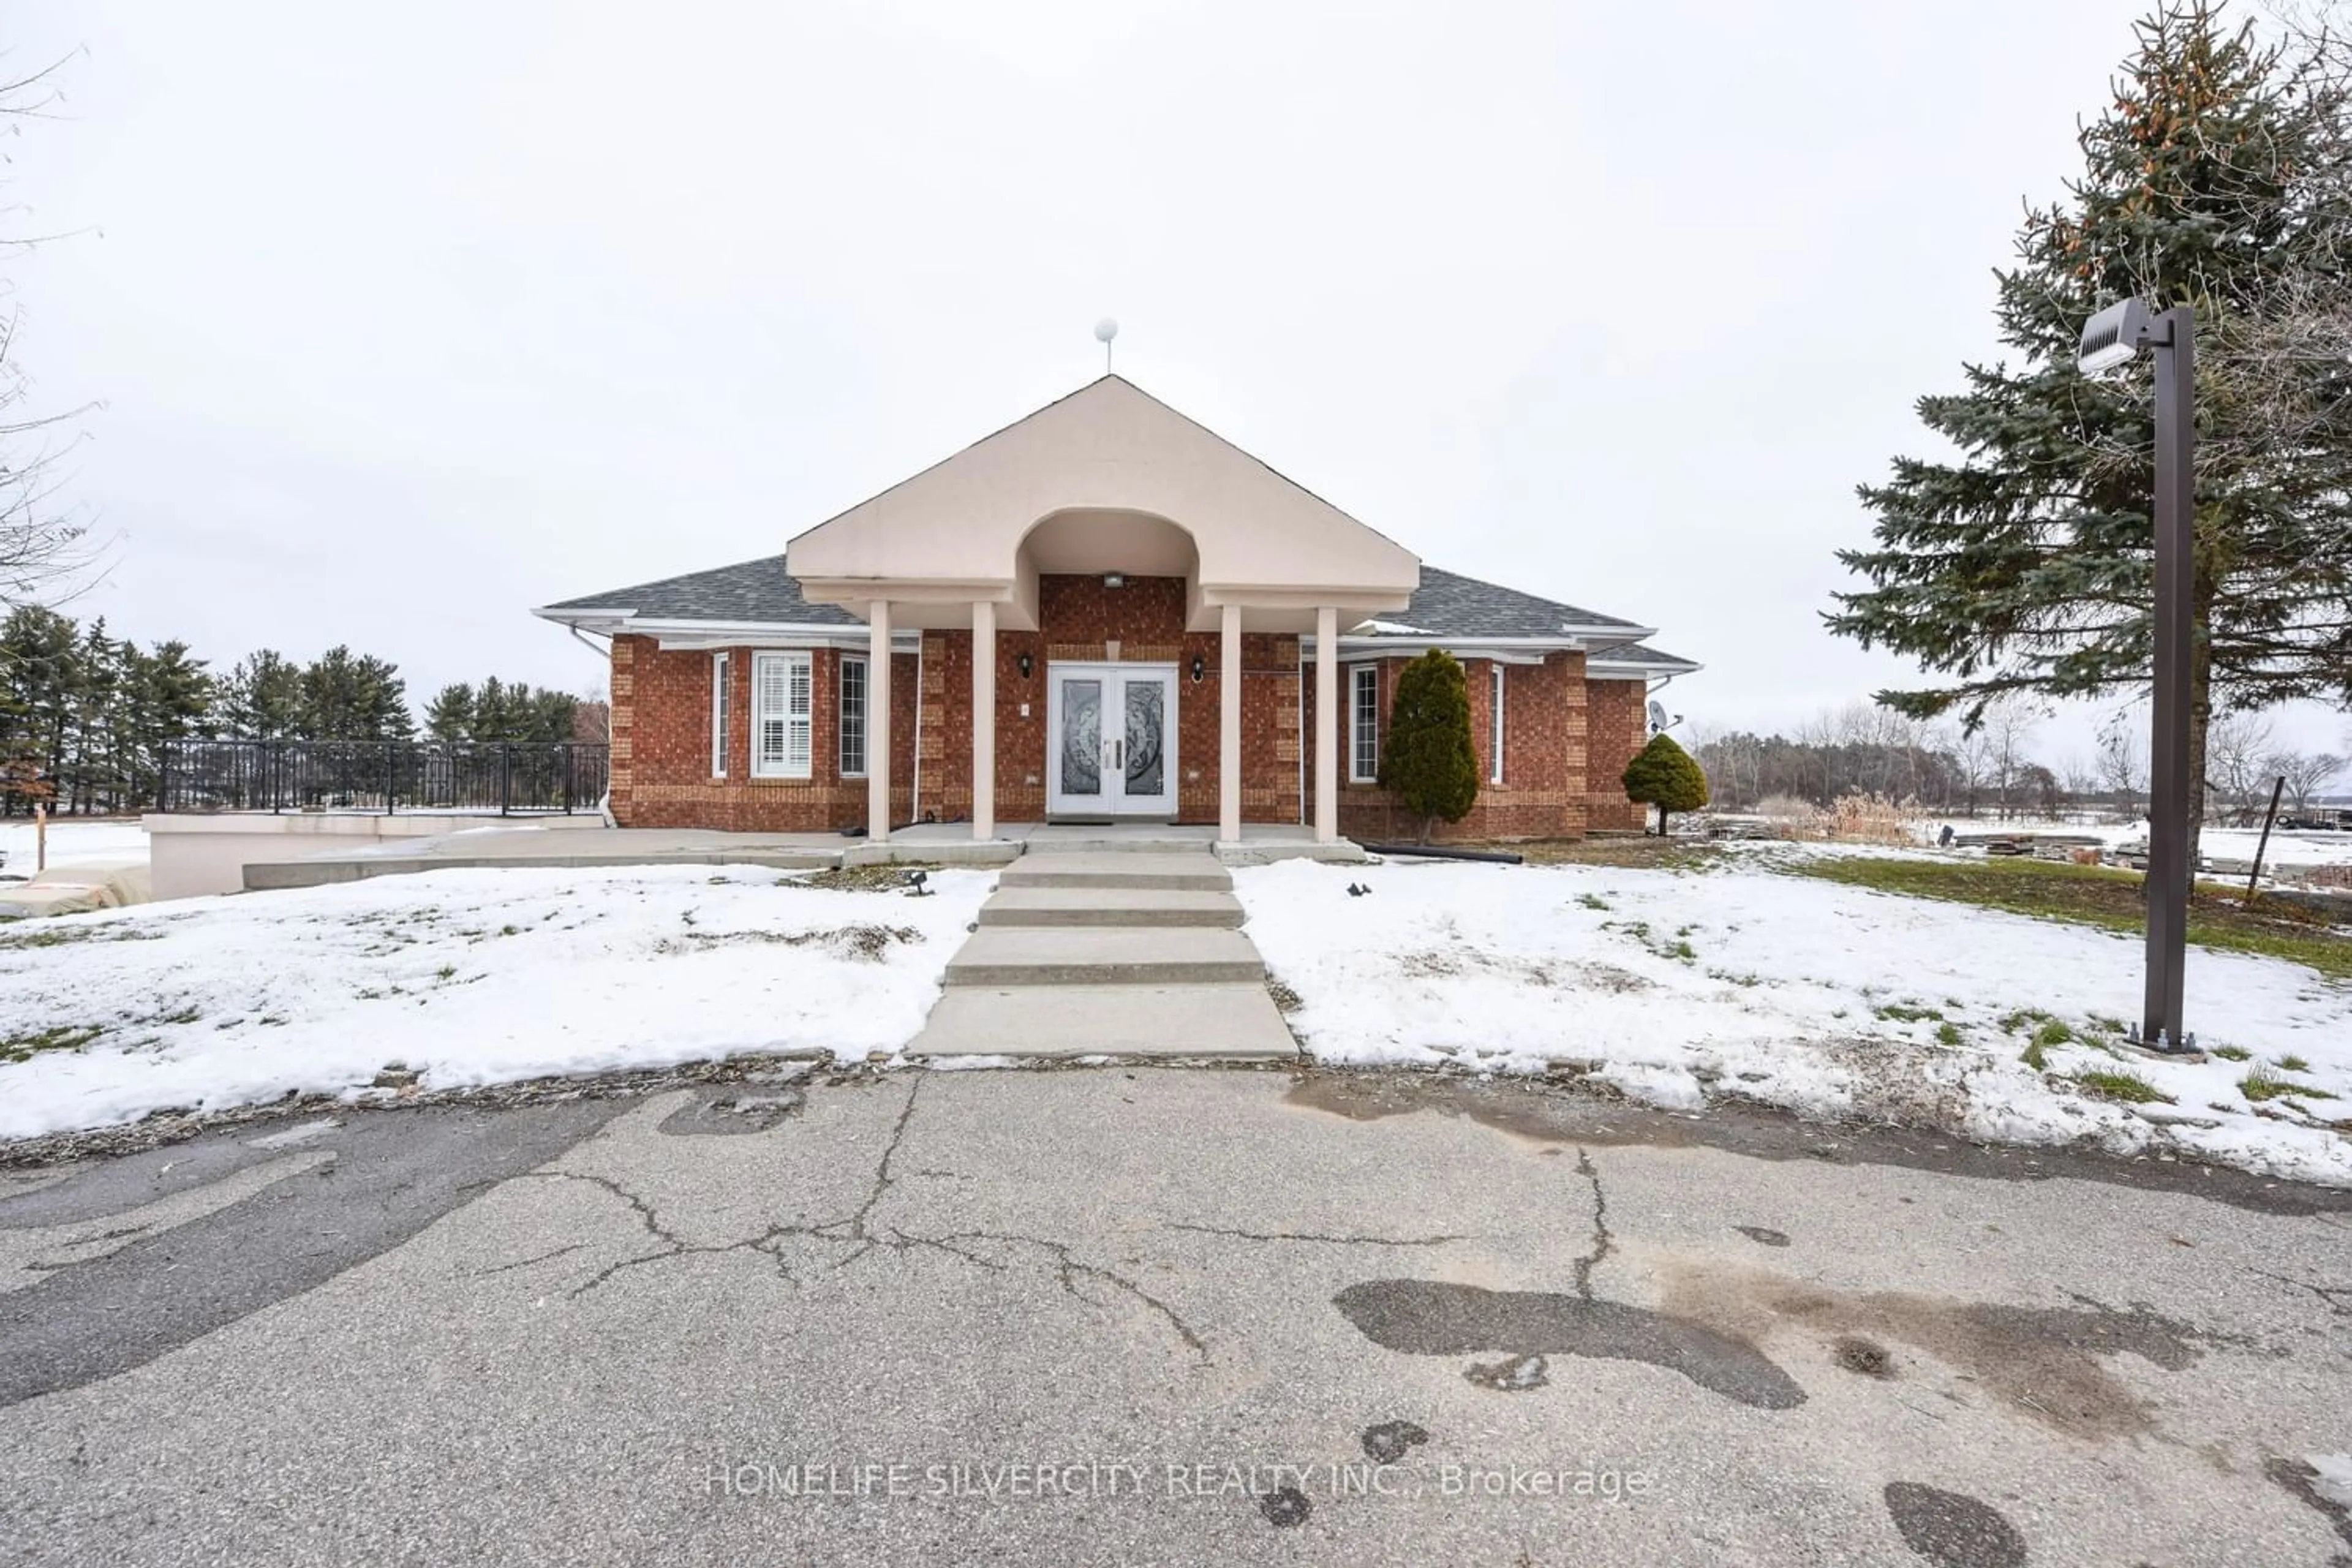 Outside view for 14707 Dixie Rd, Caledon Ontario L7C 2M9